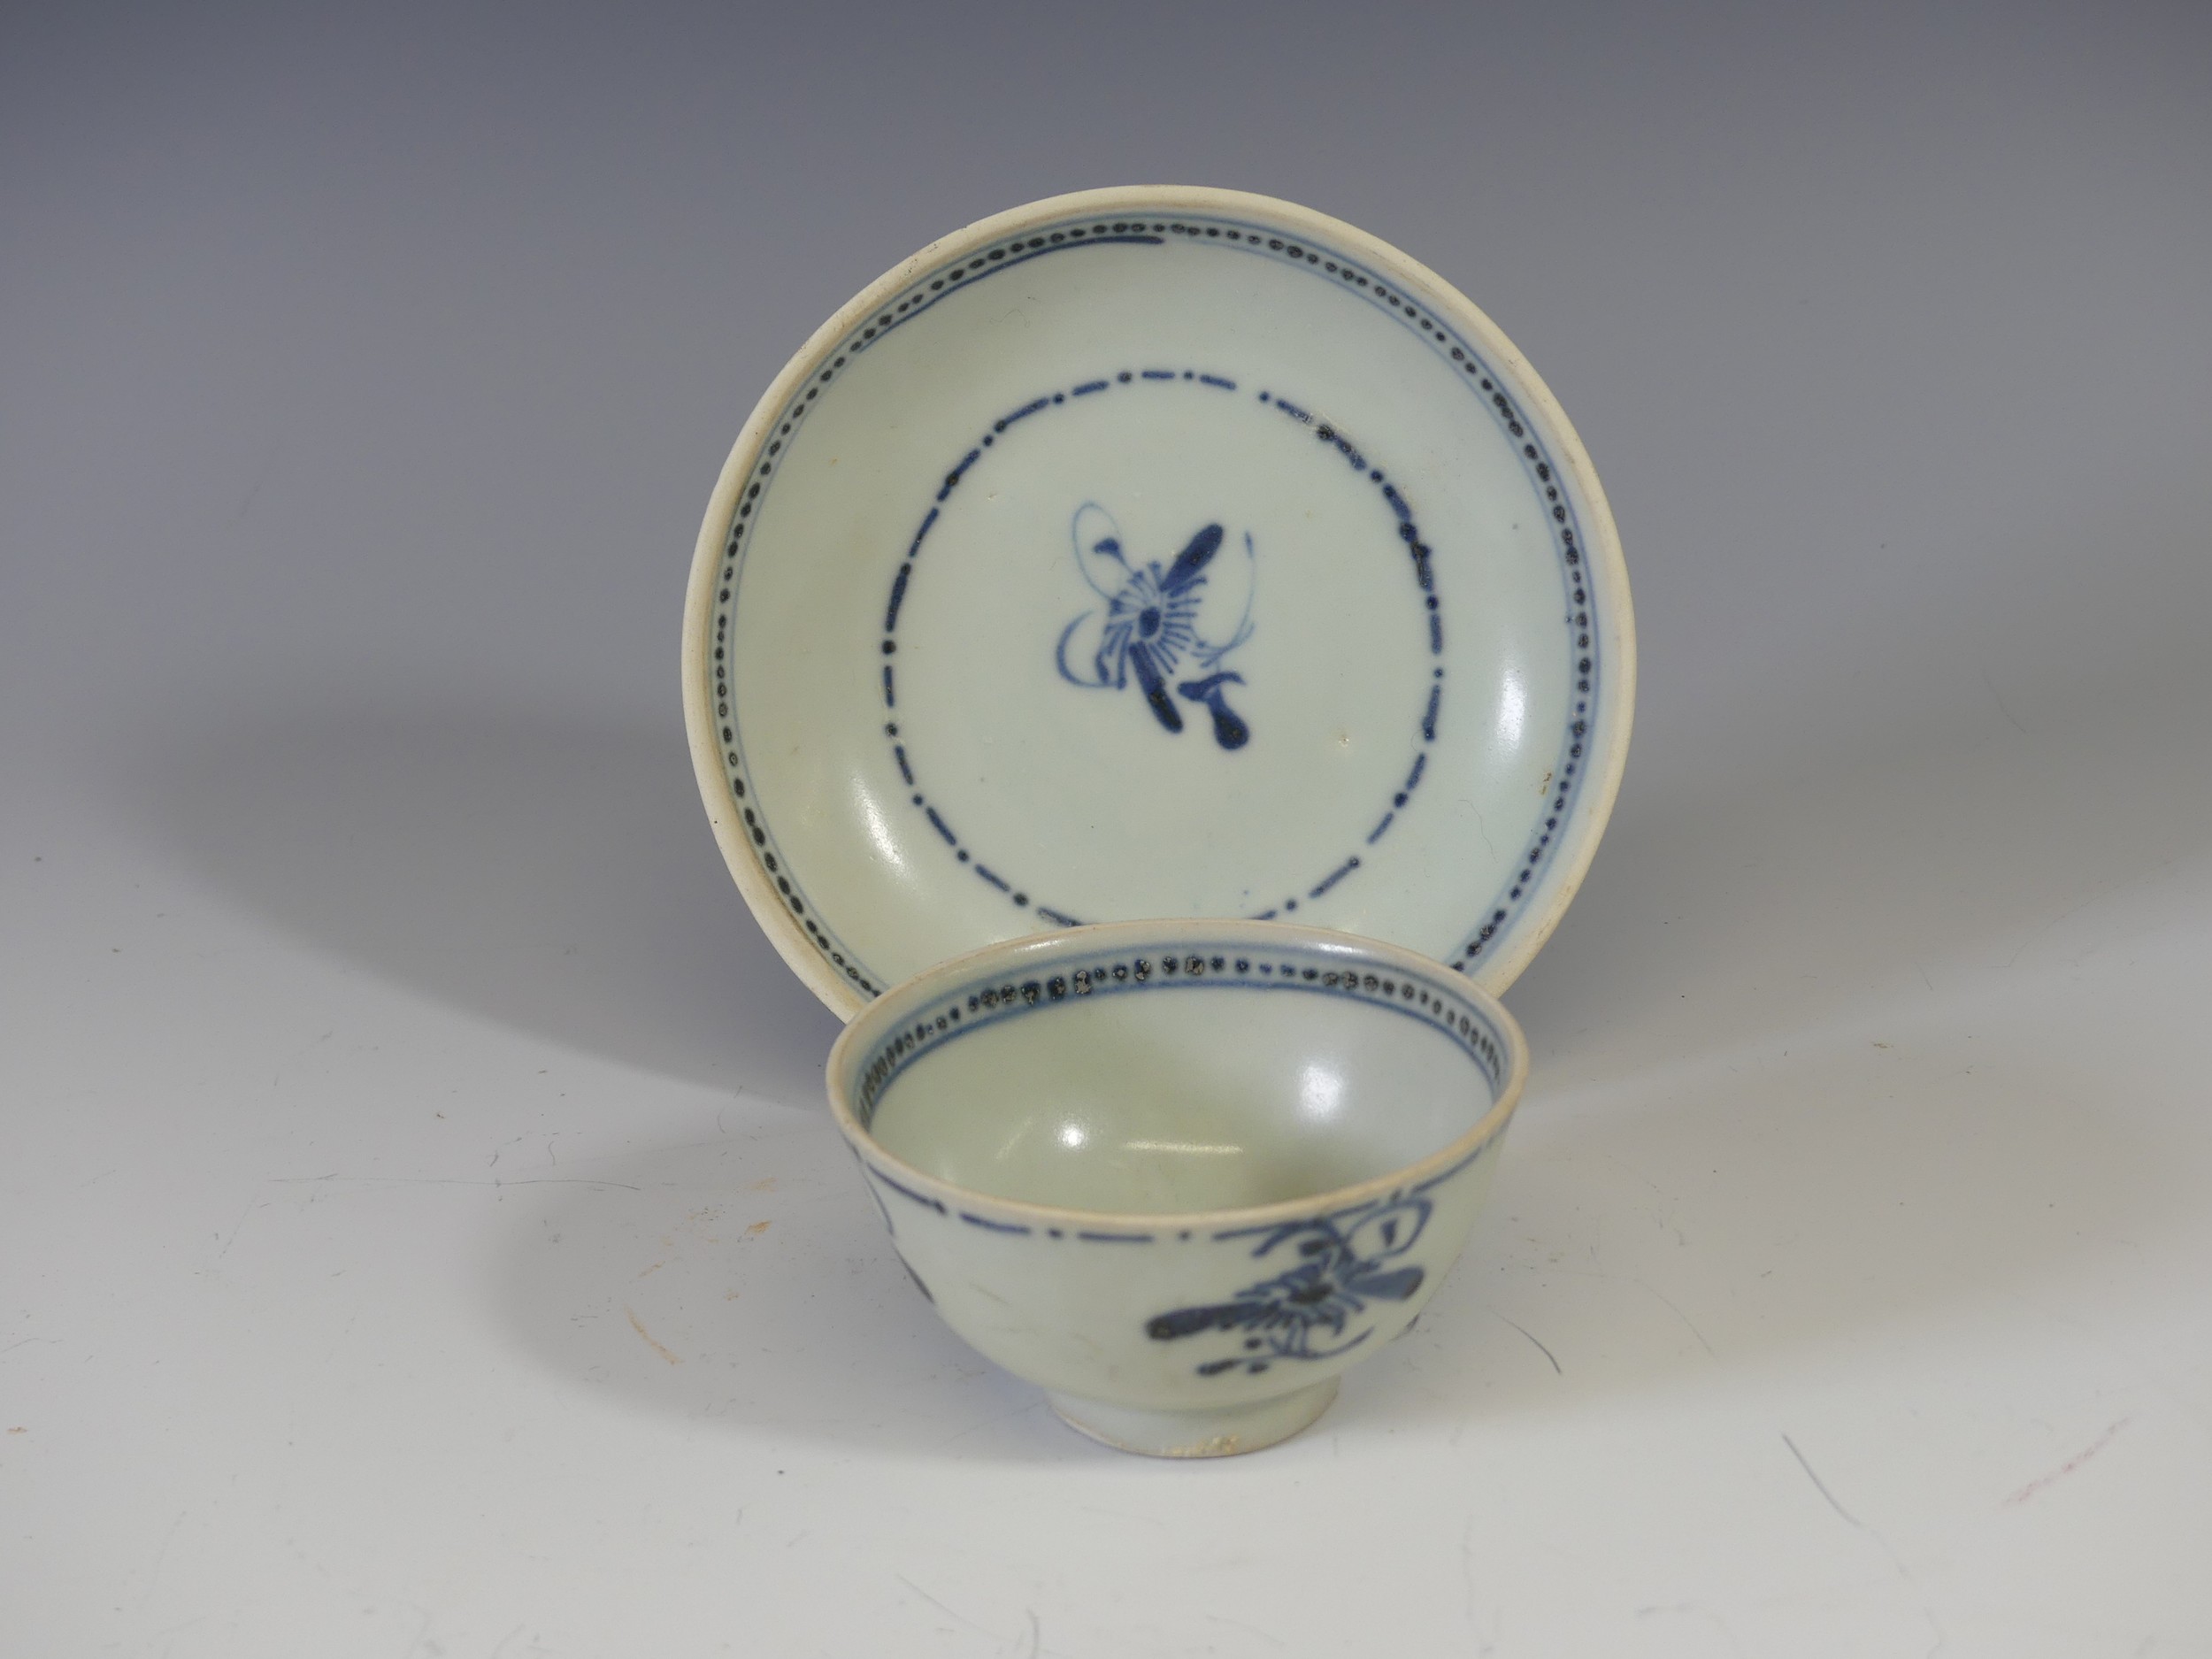 A Chinese Export 'Tek Sing Treasures' blue and white porcelain Tea Bowl and Saucer, decorated with a - Image 3 of 6